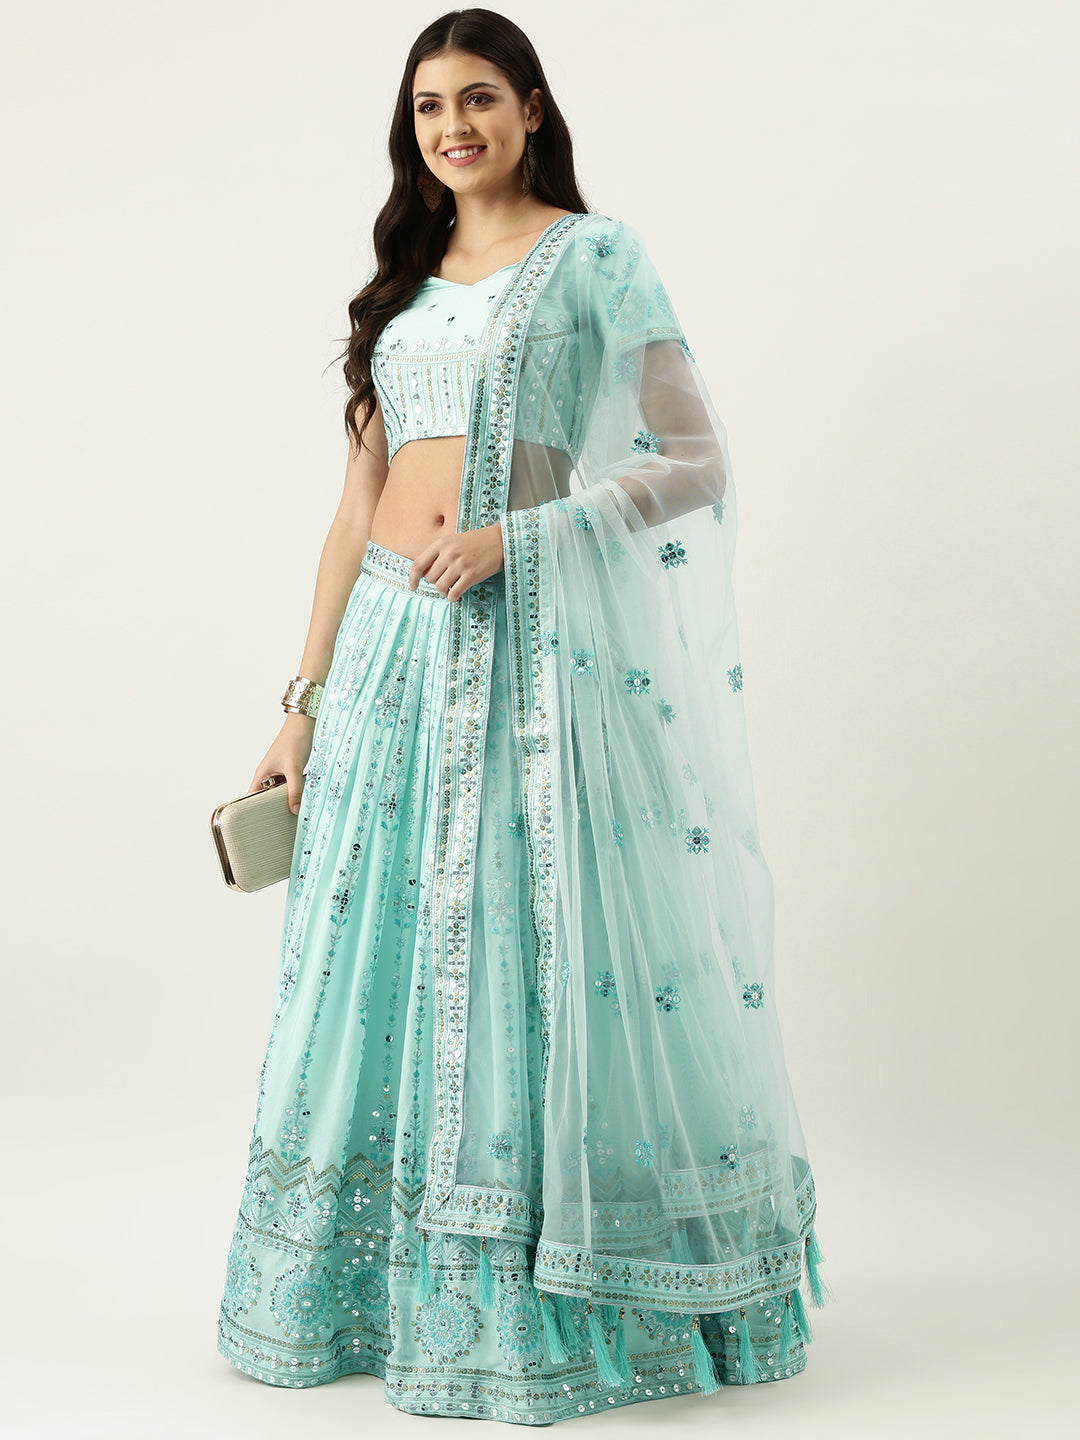 Women's Turqouise Blue Pure Georgette Embroidered Fully Stitched Lehenga & Stitched Blouse, Dupatta - Royal Dwells